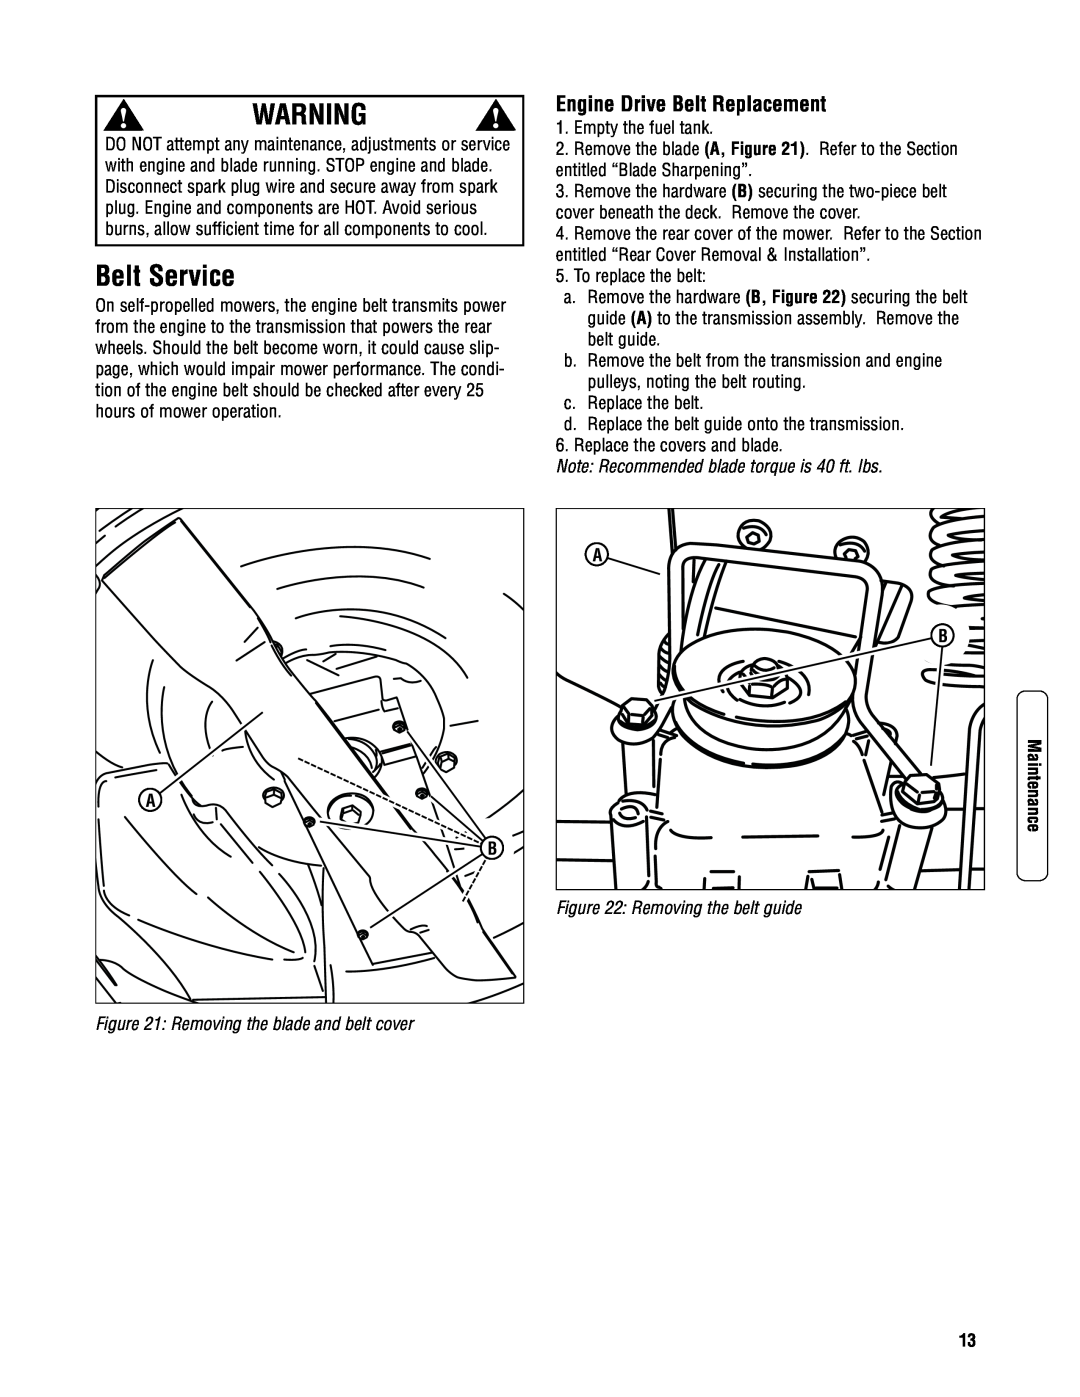 Briggs & Stratton SPVH21675 Belt Service, Note Recommended blade torque is 40 ft. lbs, Removing the blade and belt cover 